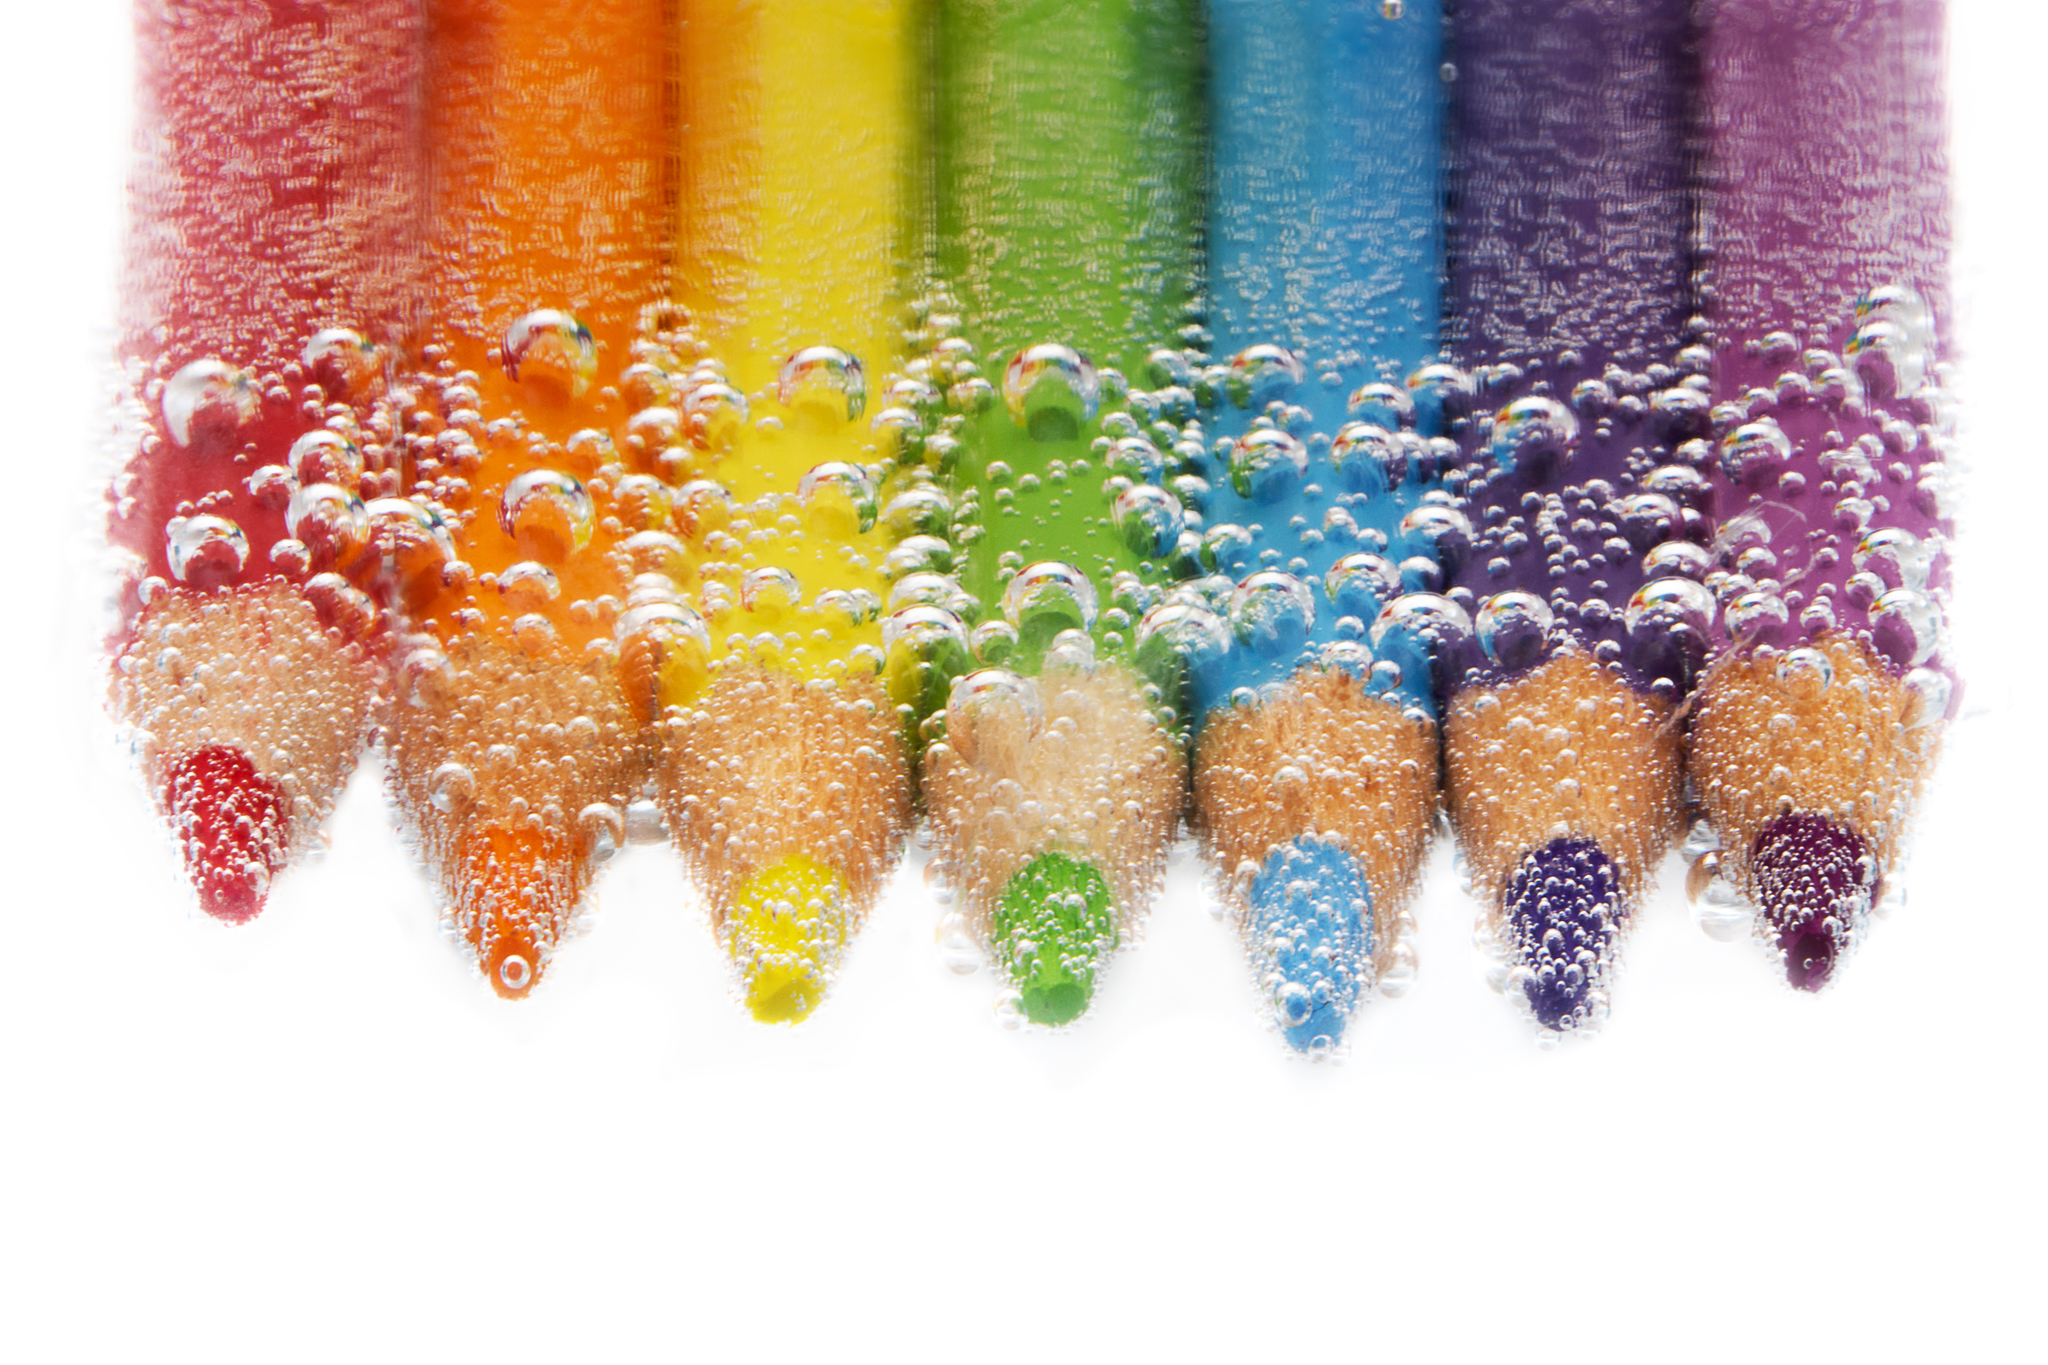 Colored Pencils in Sparkling Water